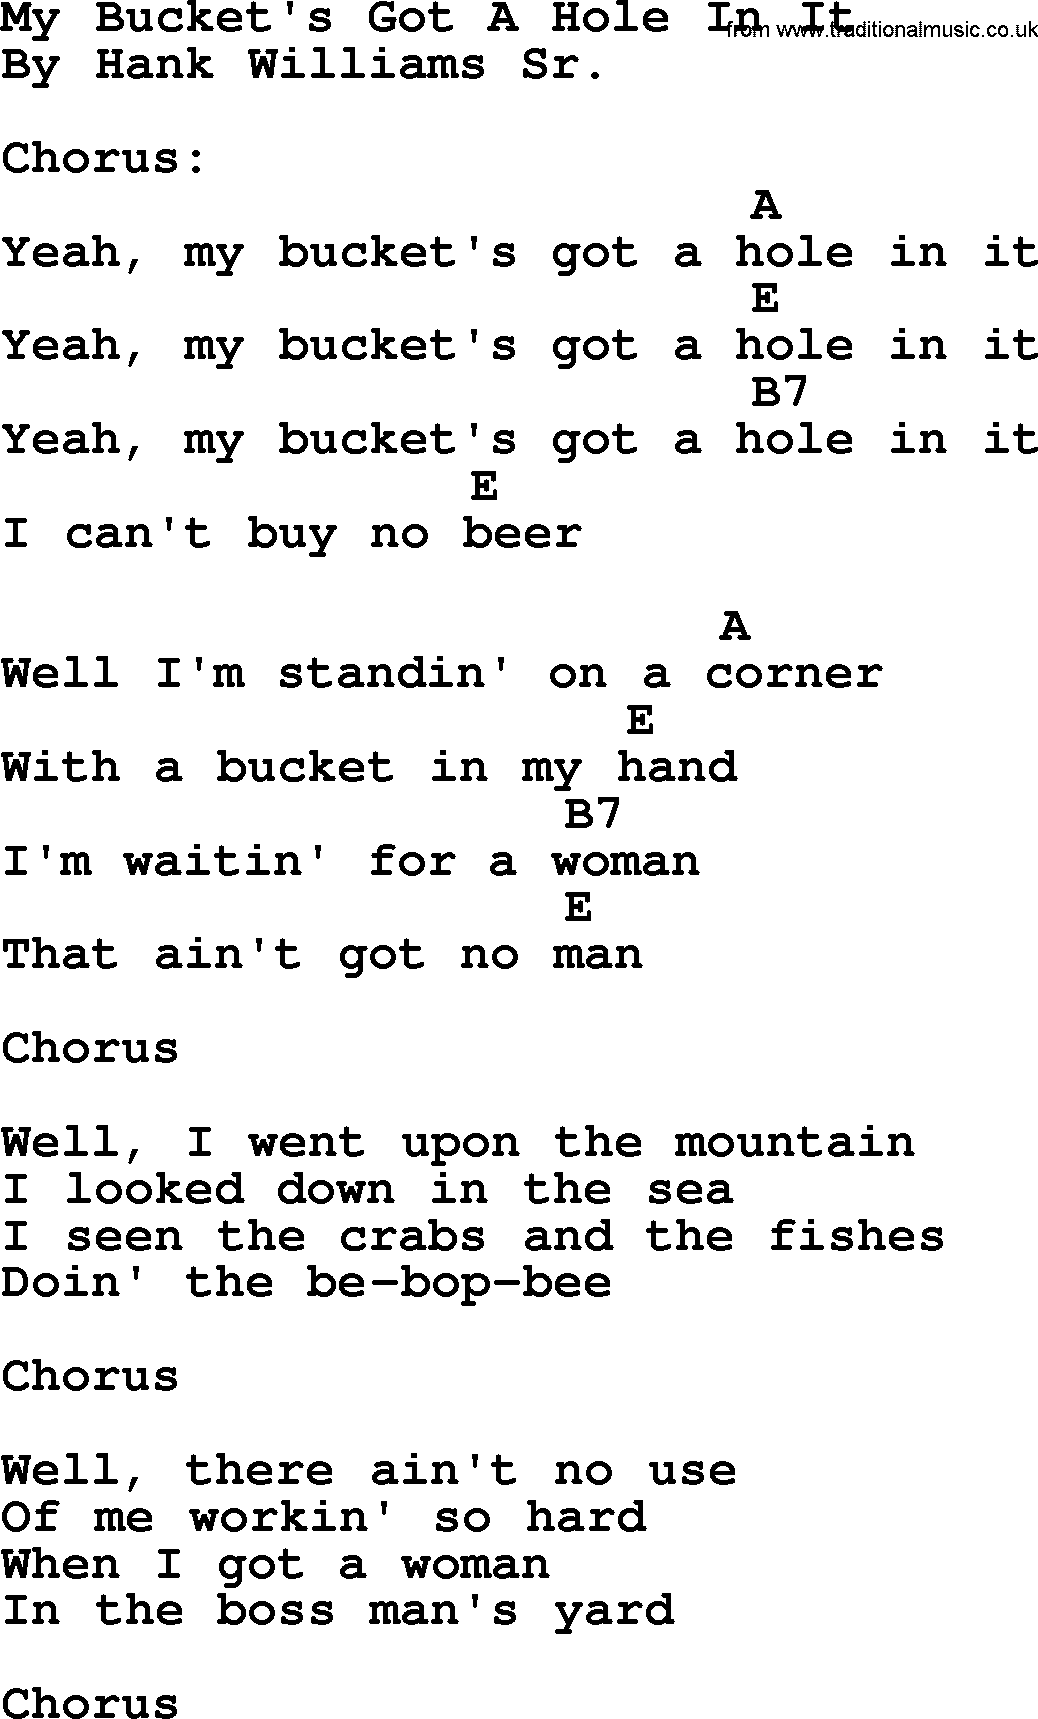 Hank Williams song My Bucket's Got A Hole In It, lyrics and chords